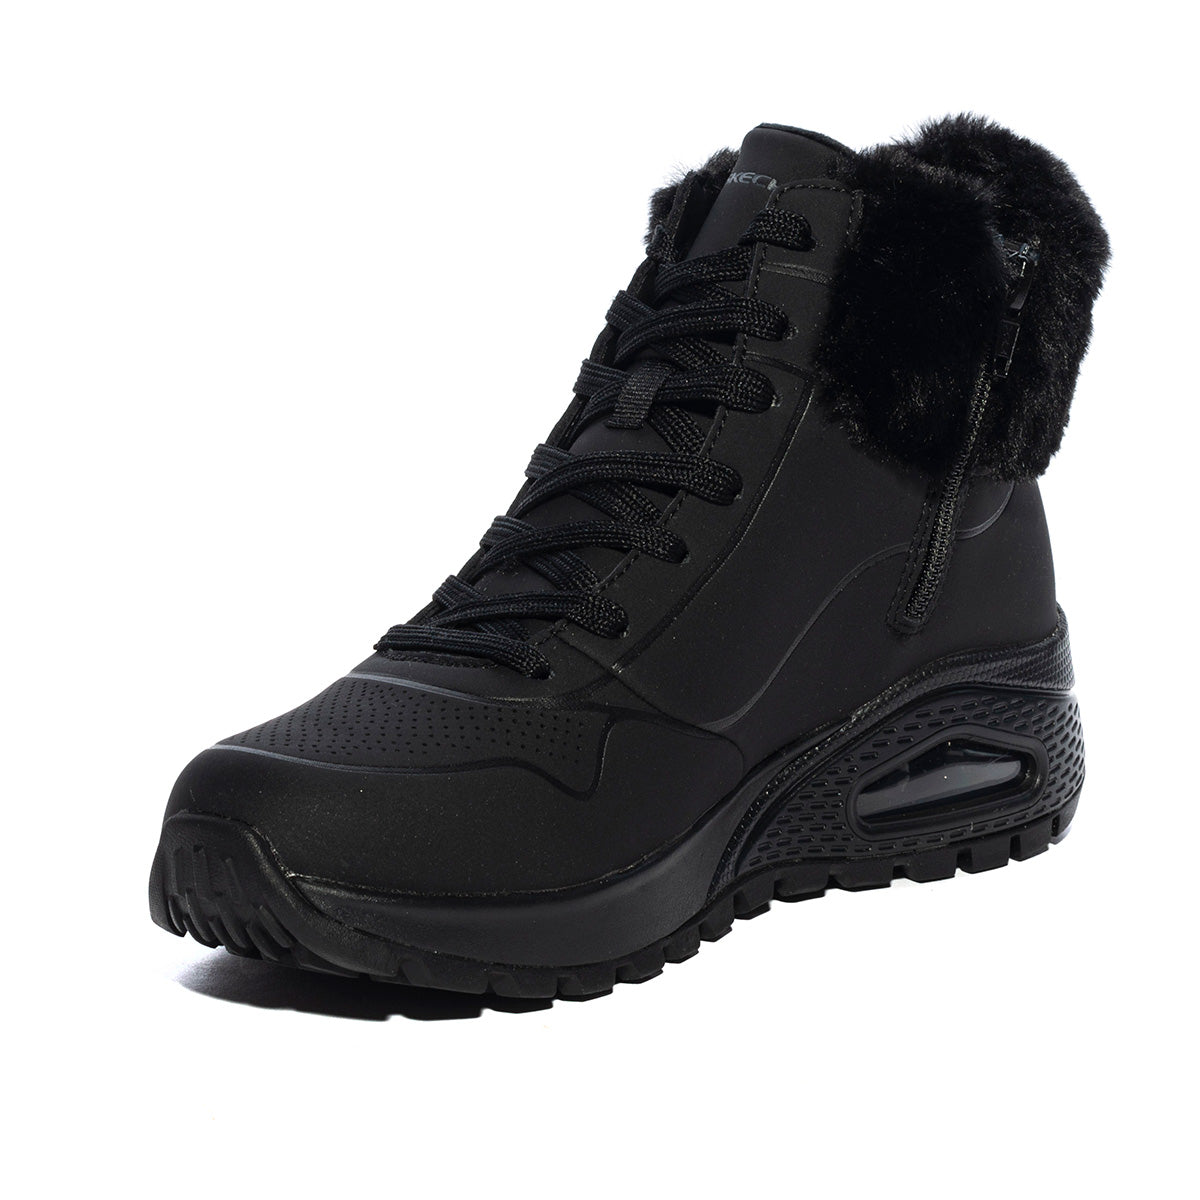 Sneakers Skechers Uno Rugged Fall Air nere